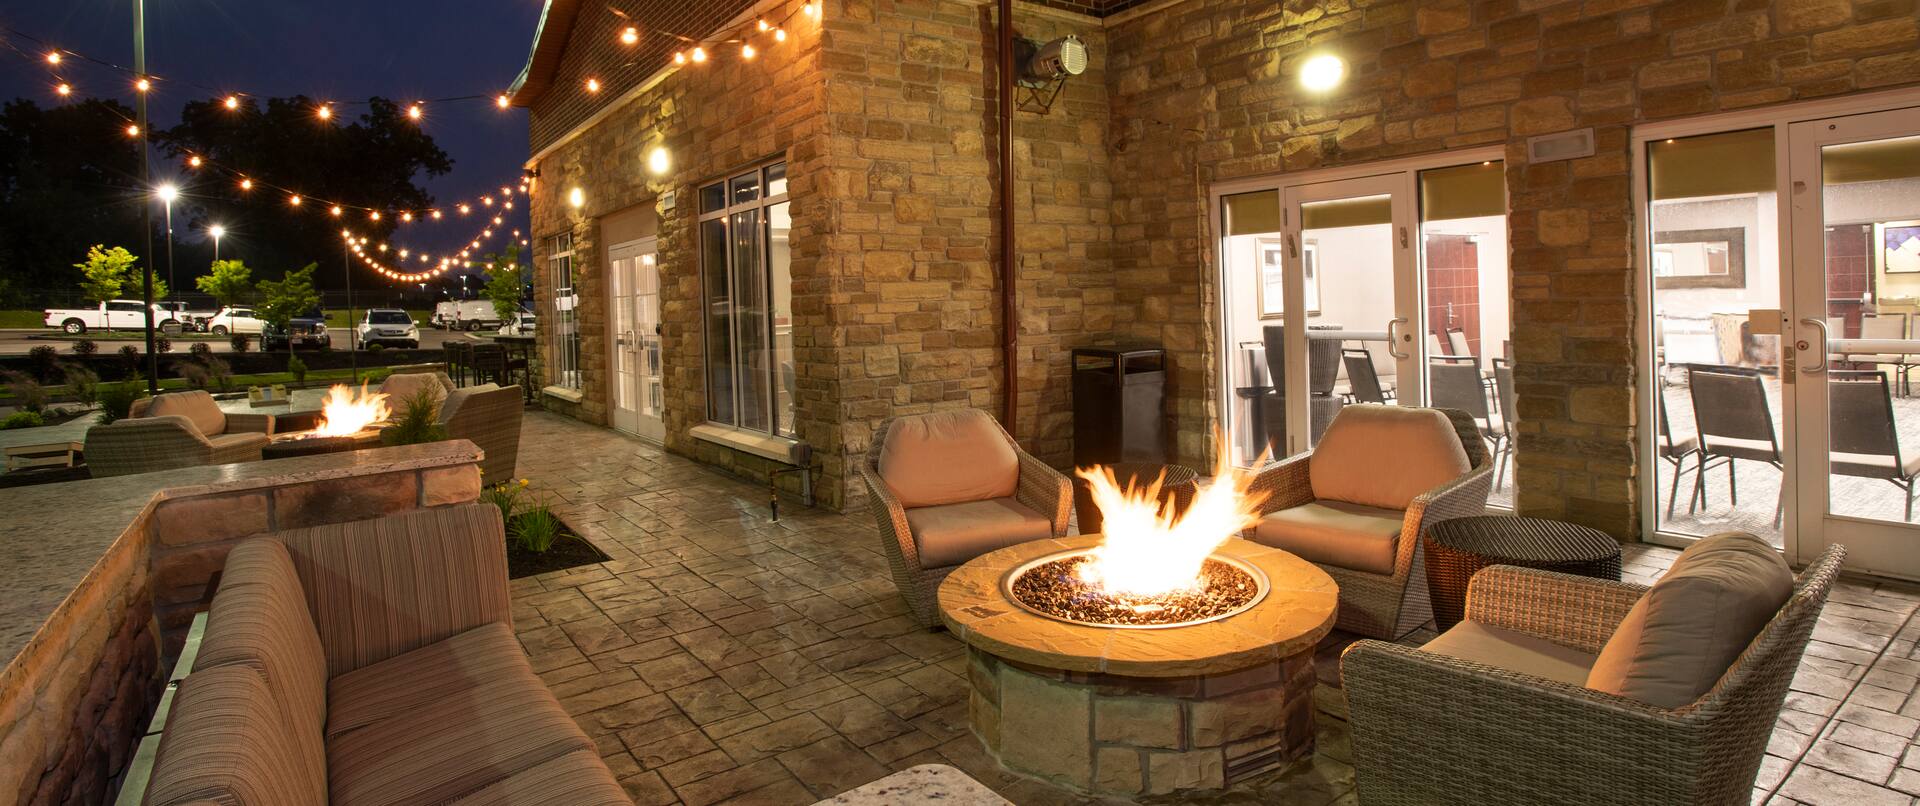 Evening View of Seating Area of Outdoor Patio with Fire Pit